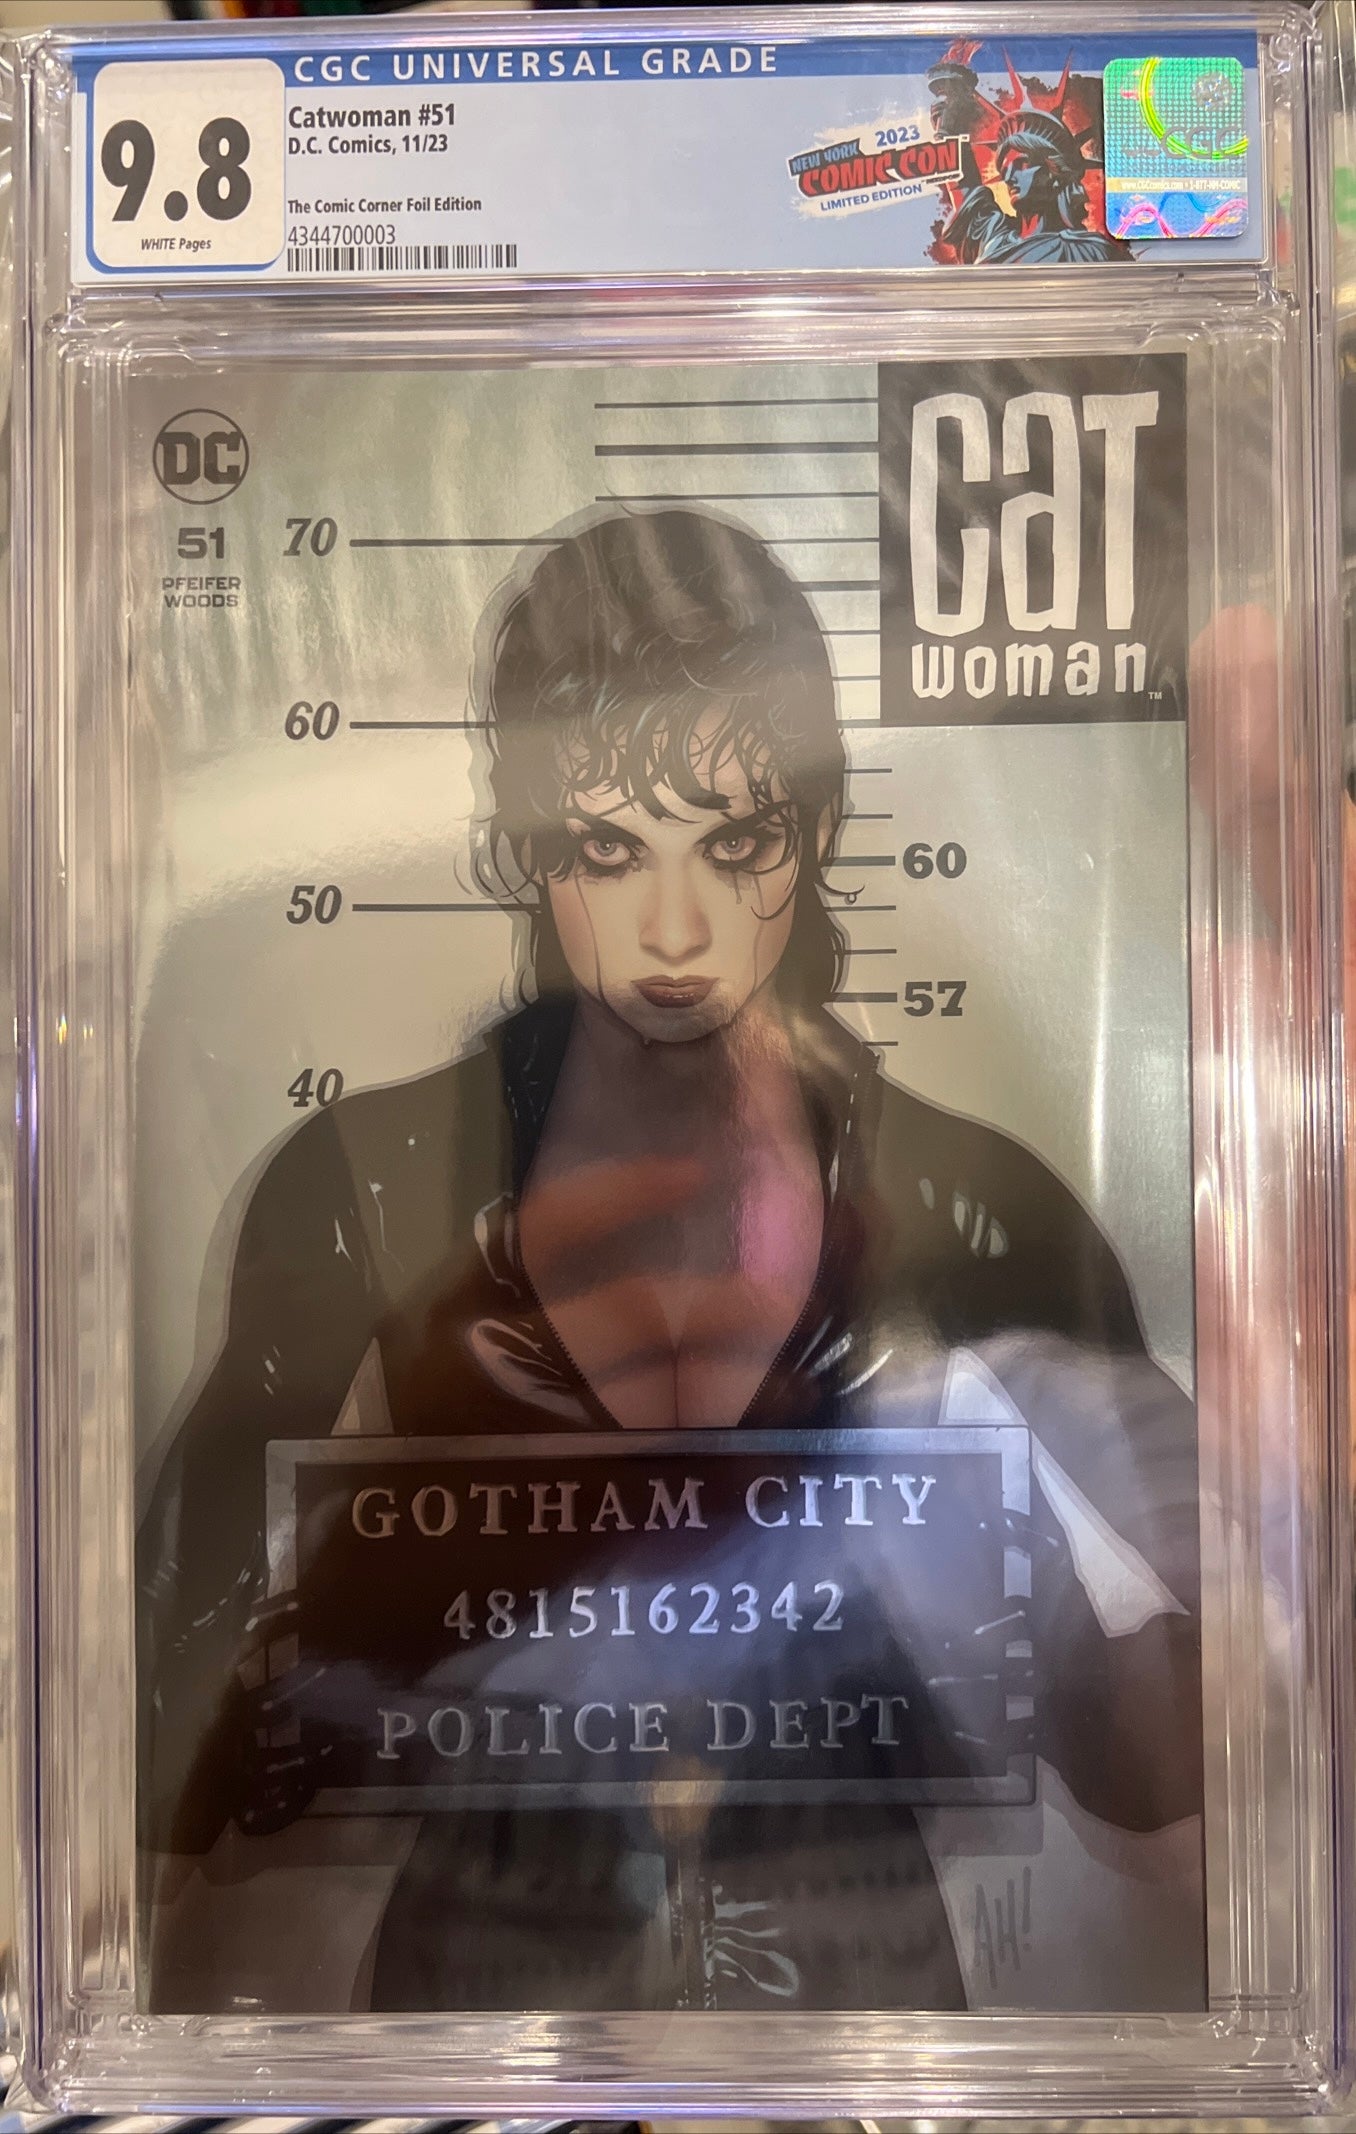 Catwoman #51 CGC 9.8 (NYCC Foil Edition) W/ NYCC LABEL